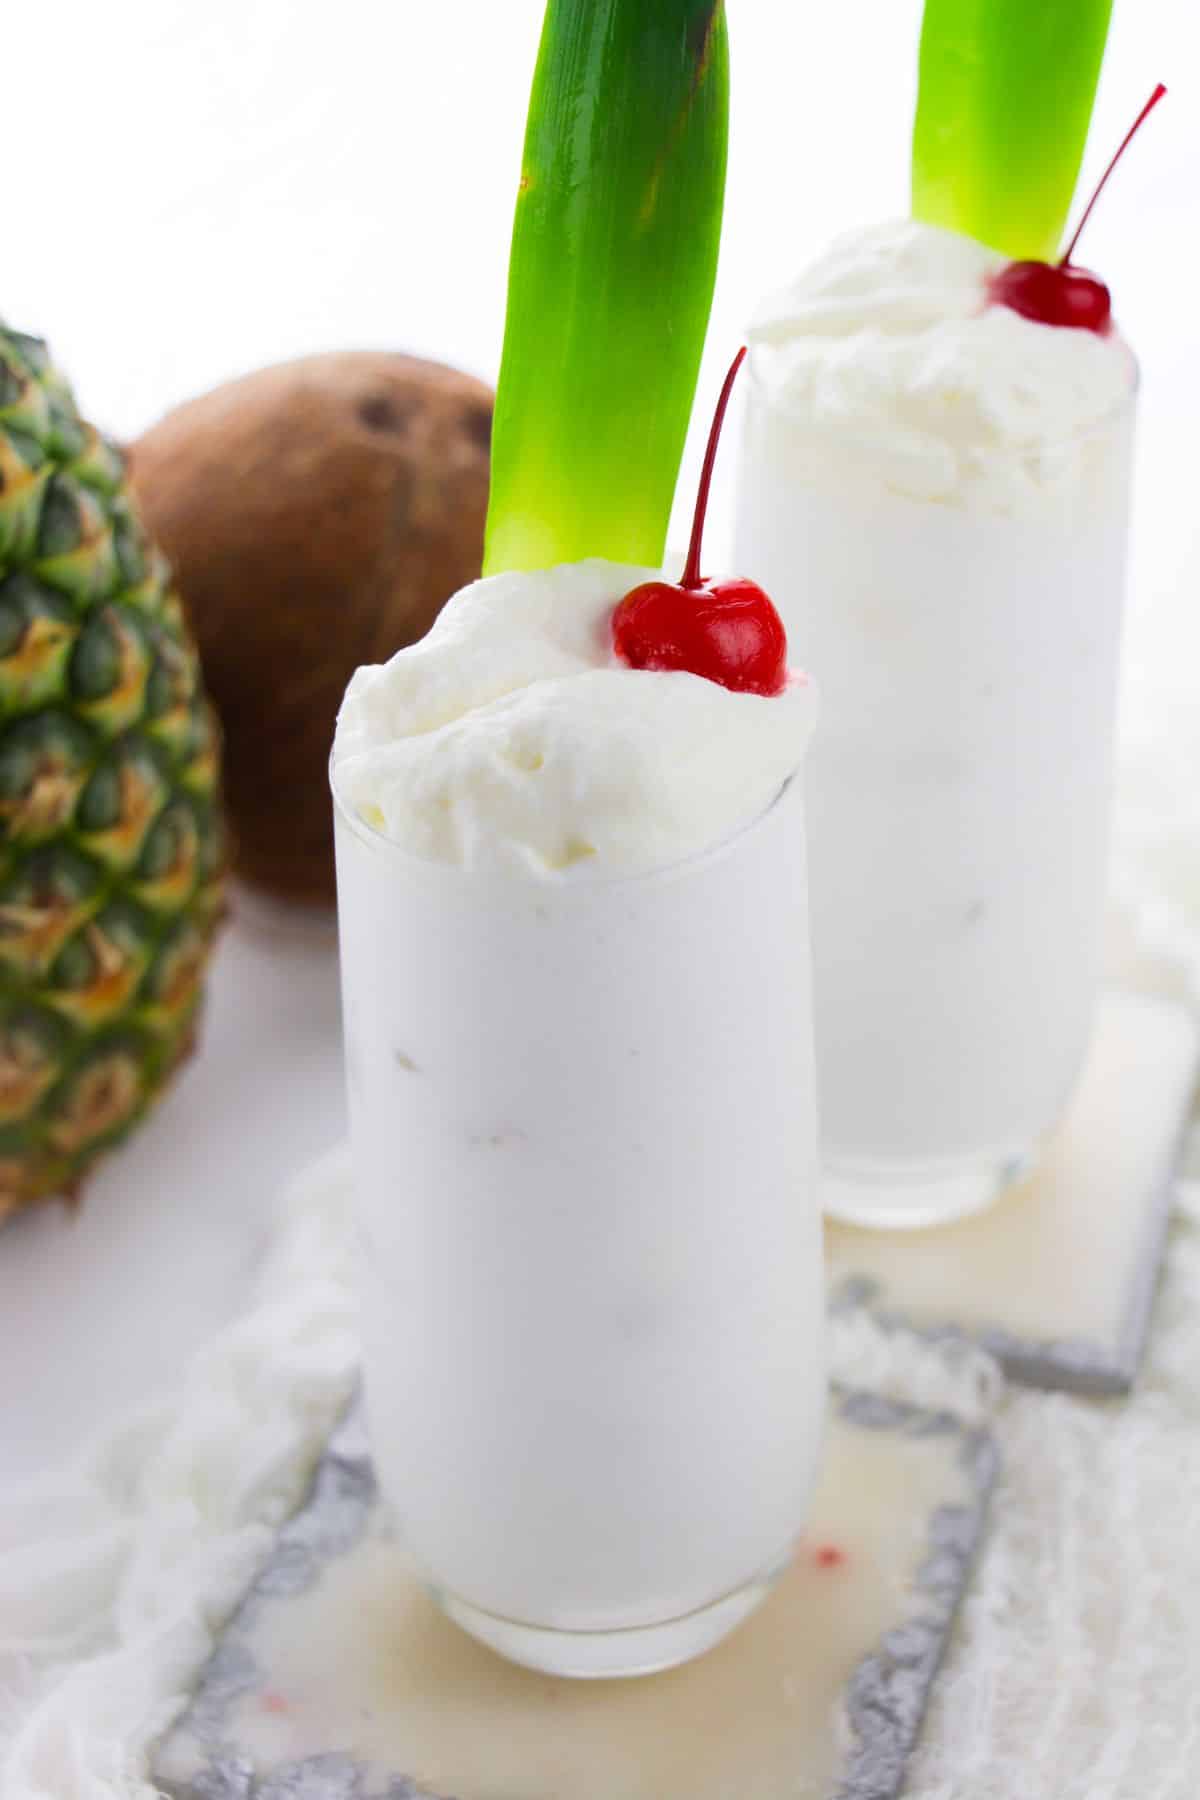 Pina Colada Recipe With Coconut Milk in a glass, topped with whipped cream and a cherry.